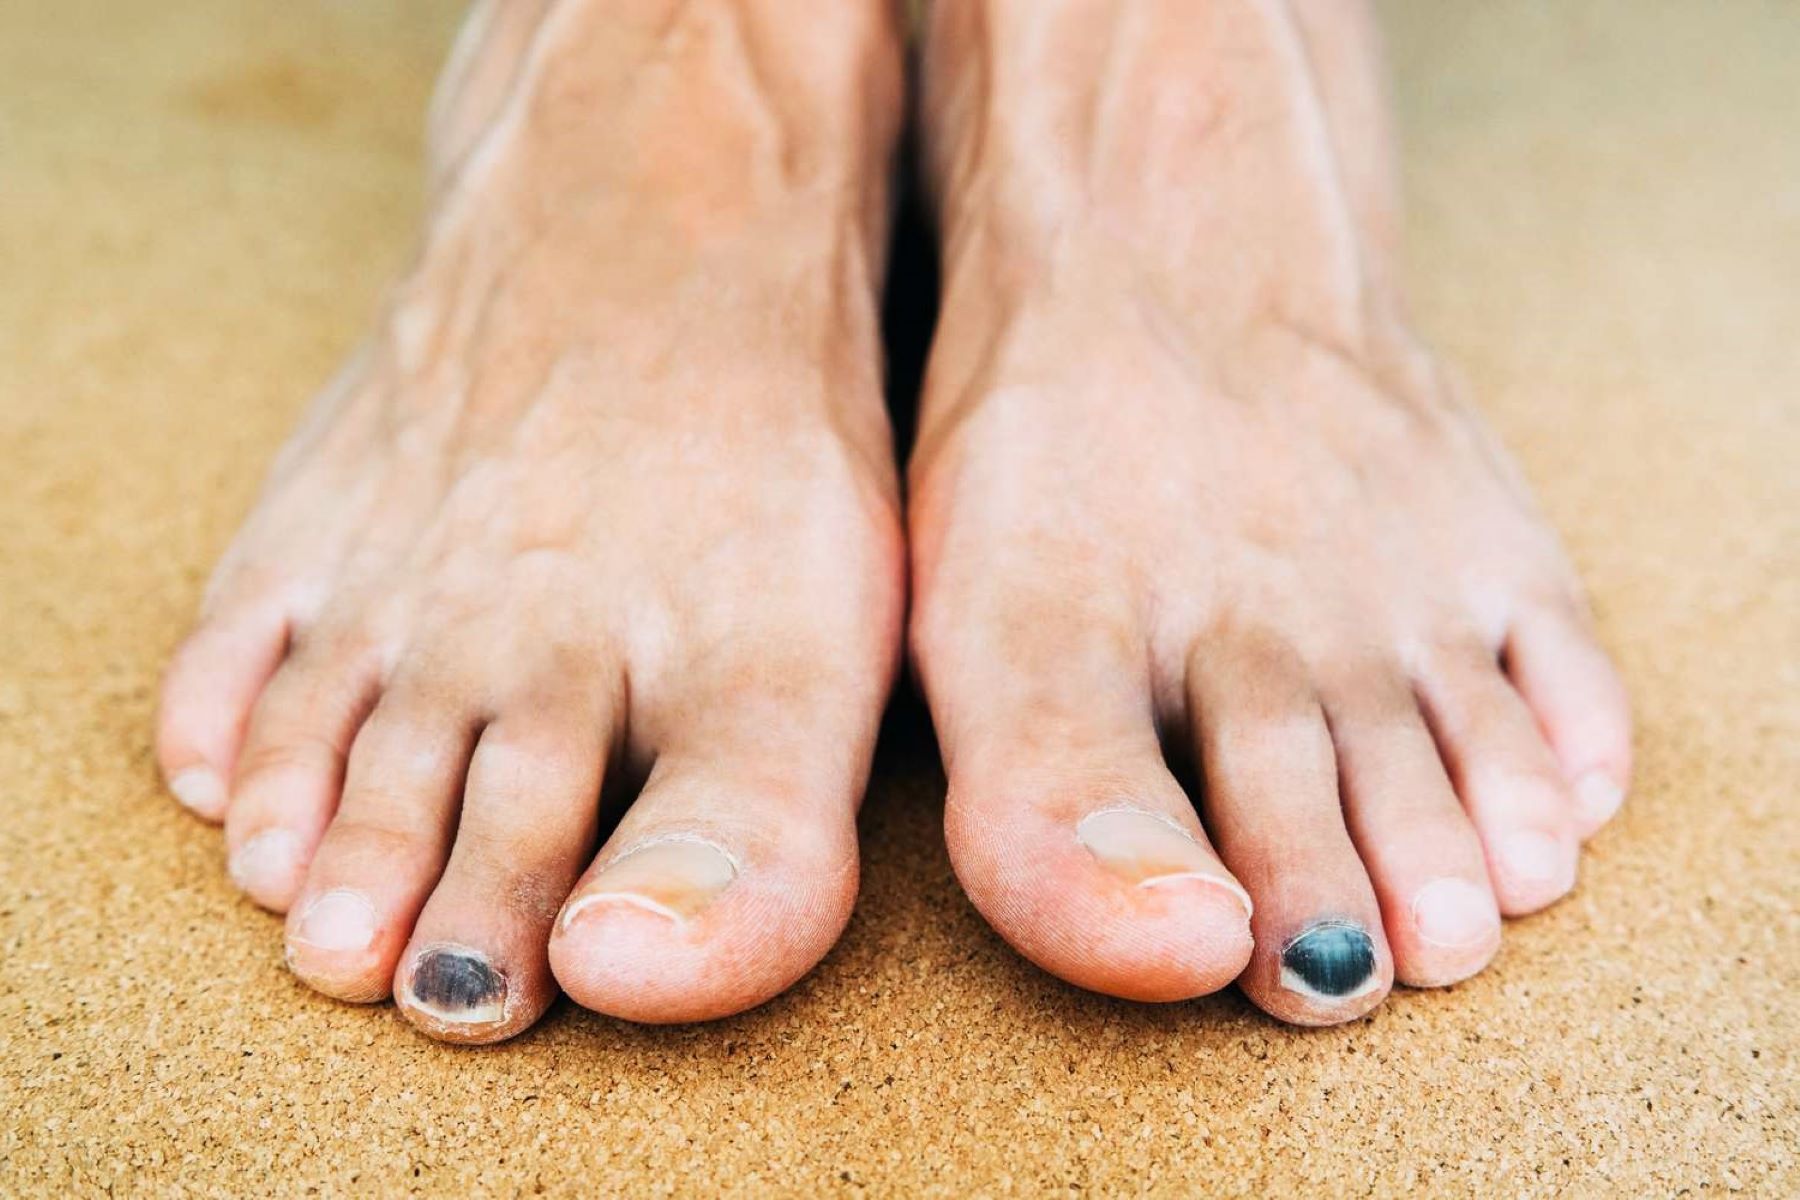 Treating Bruised Toenails: What’s The Most Effective Method?